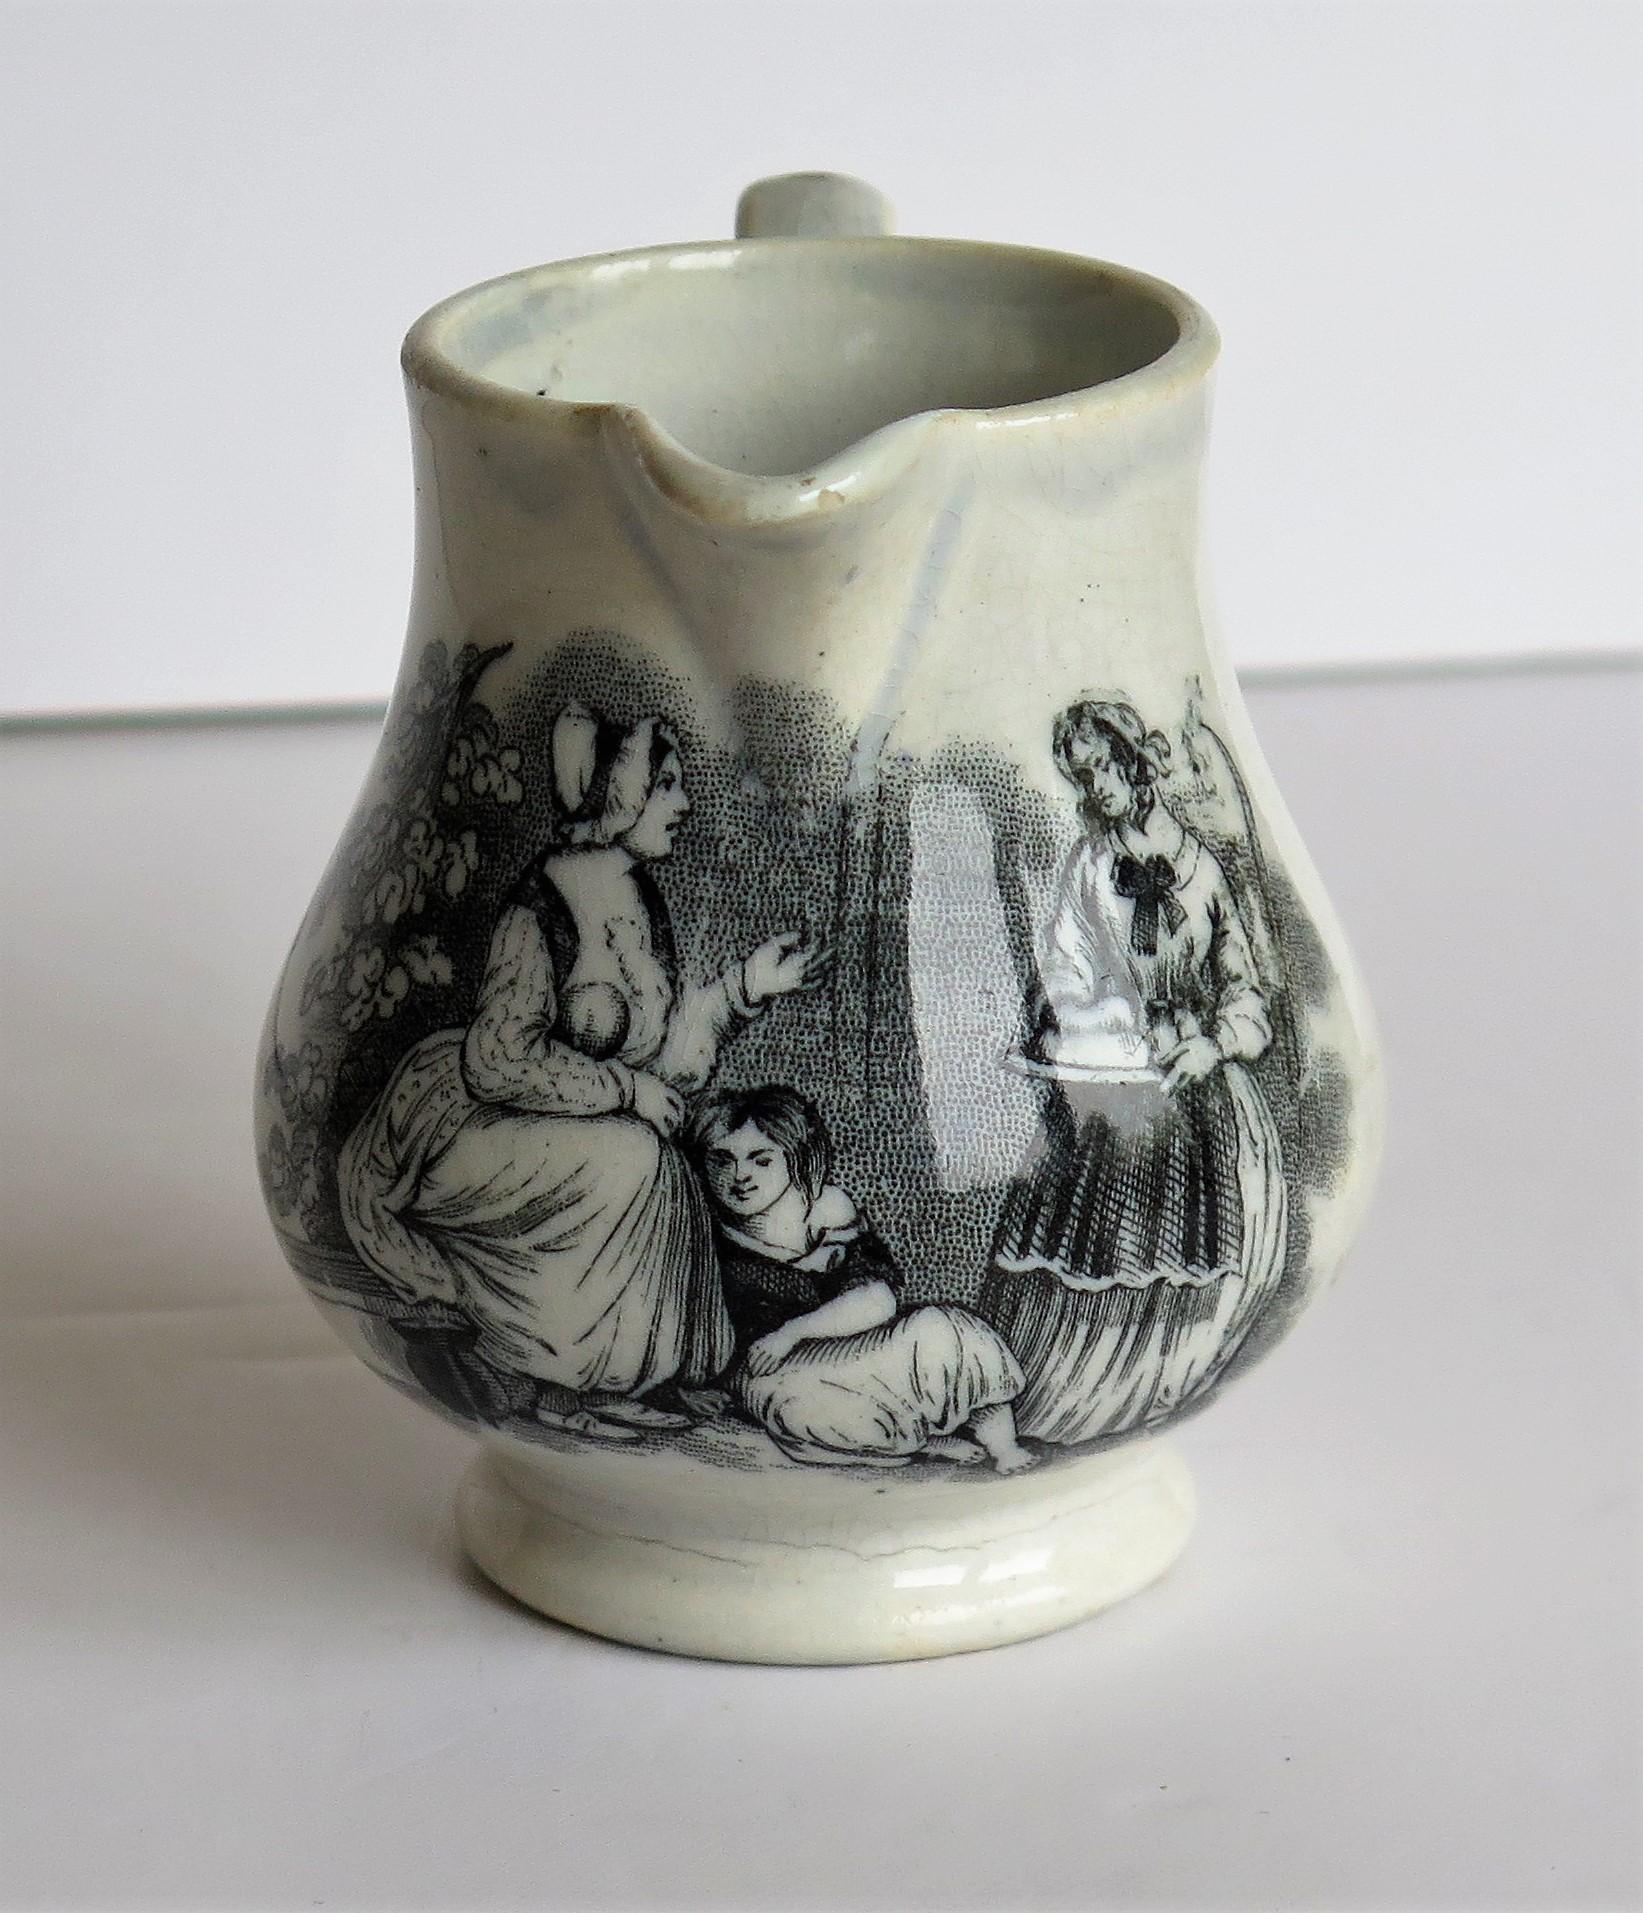 This is an early Pearlware cream Jug with a bat-printed family scene made by a Staffordshire potter in the early 19th century, late Georgian period, circa 1815.

The jug has a baluster pear shape on a low foot and a loop handle. The glaze is